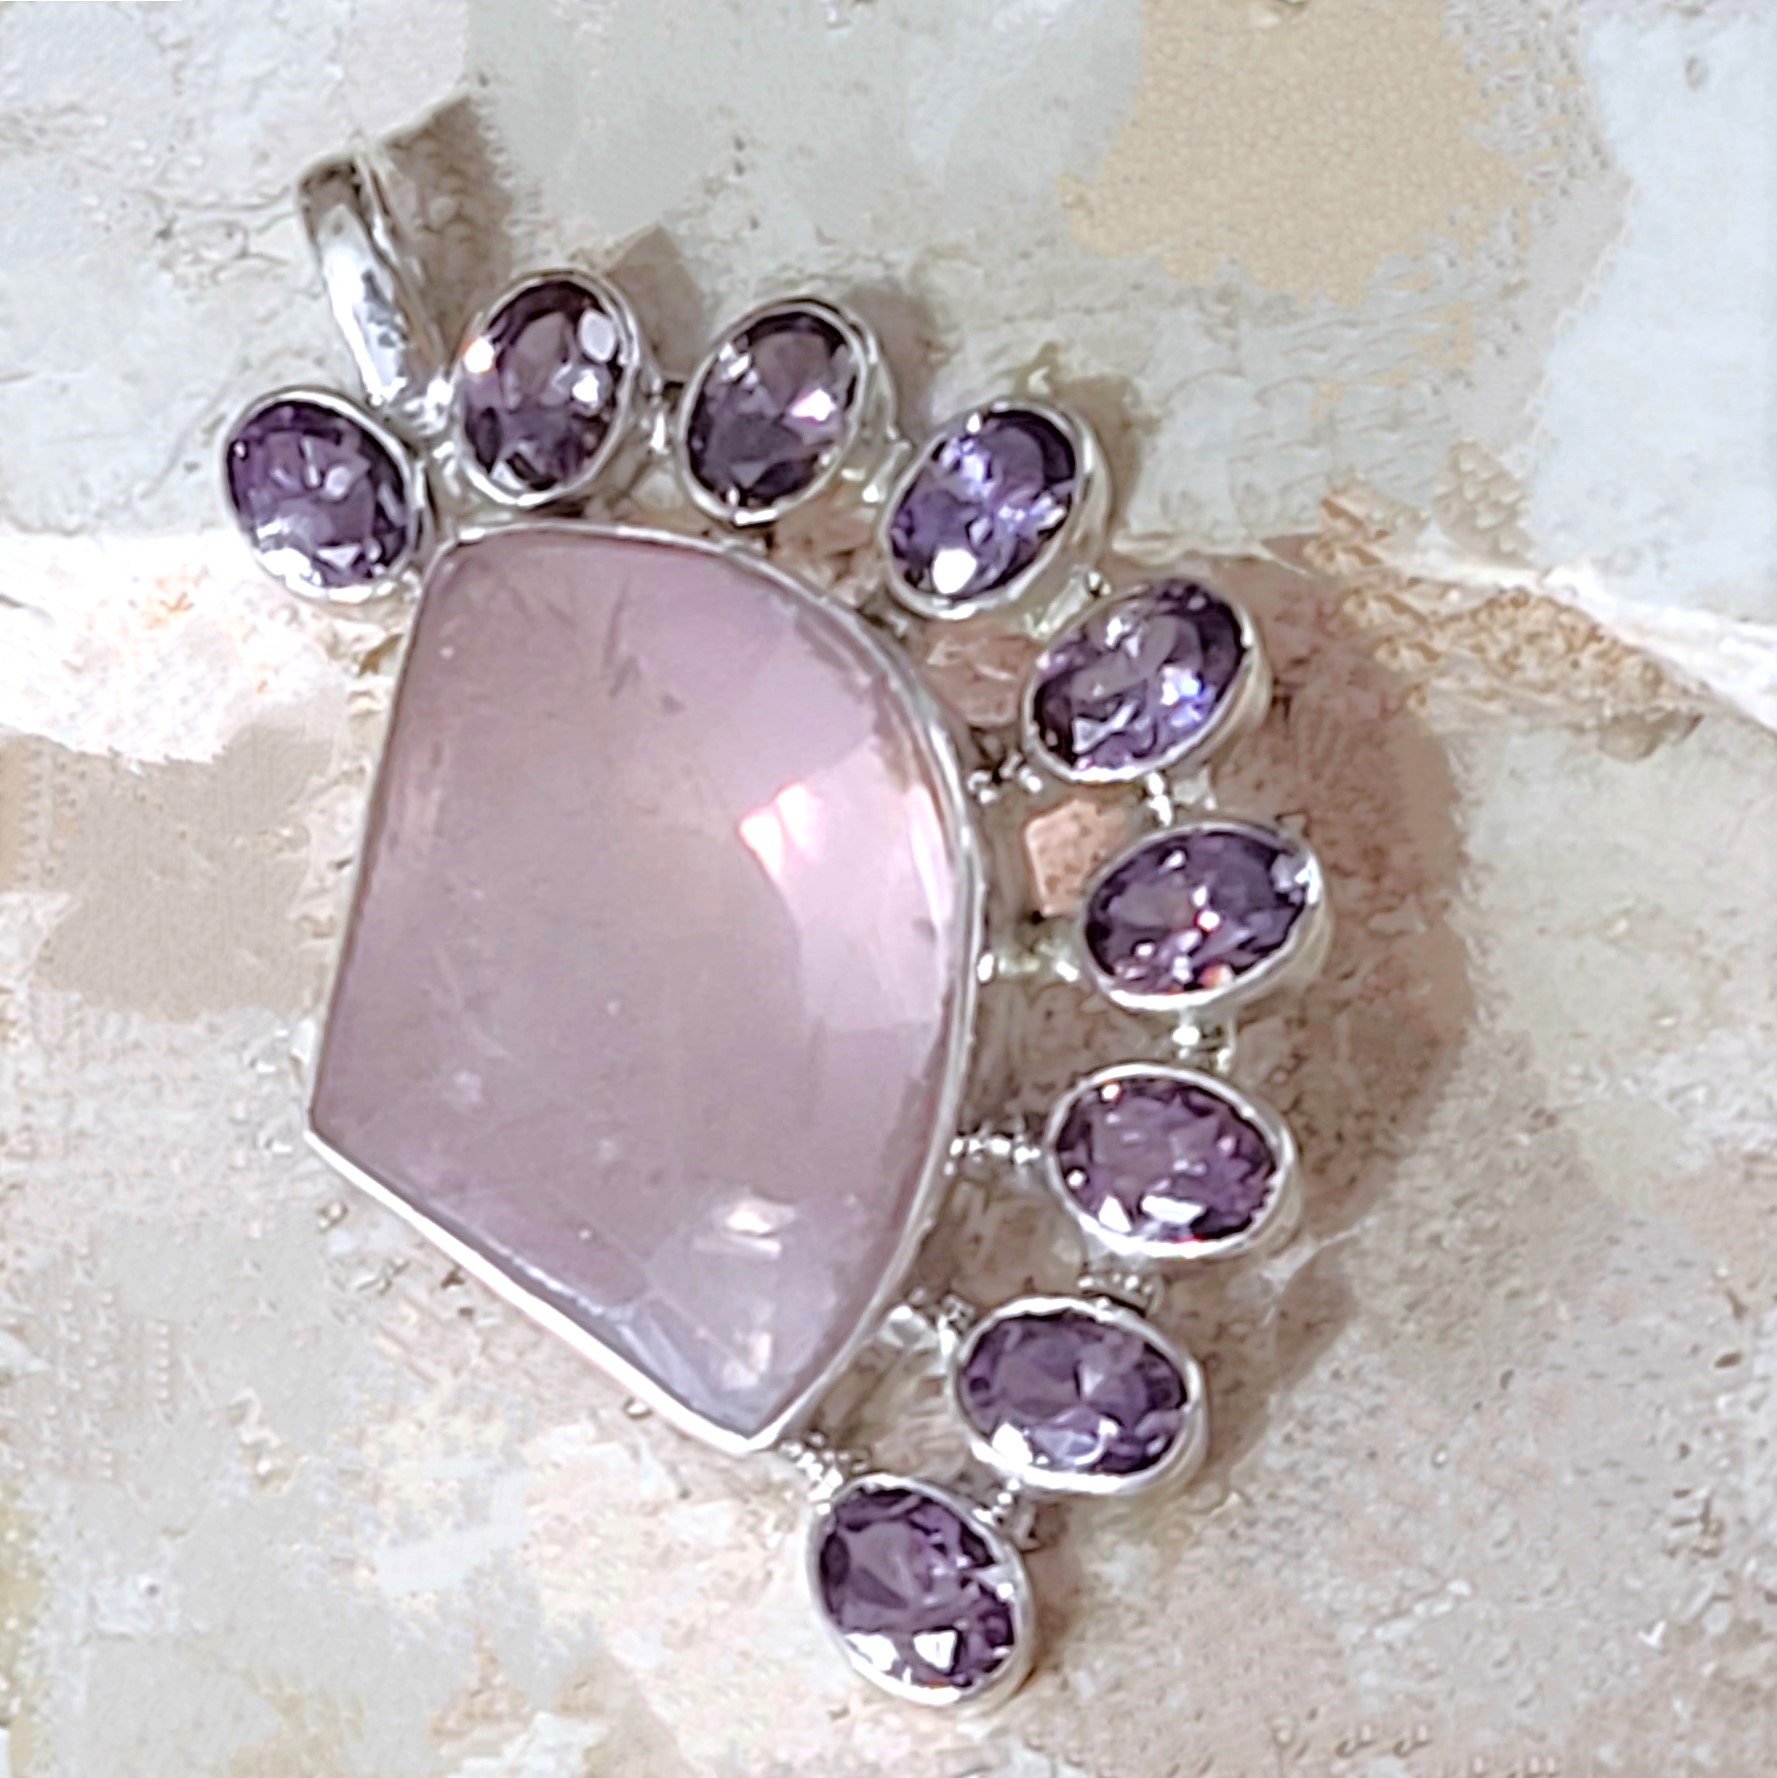 Rose quartz pendant with amethyst surrounding gemstones, moon shaped pendant set in 925 sterling silver - Click Image to Close